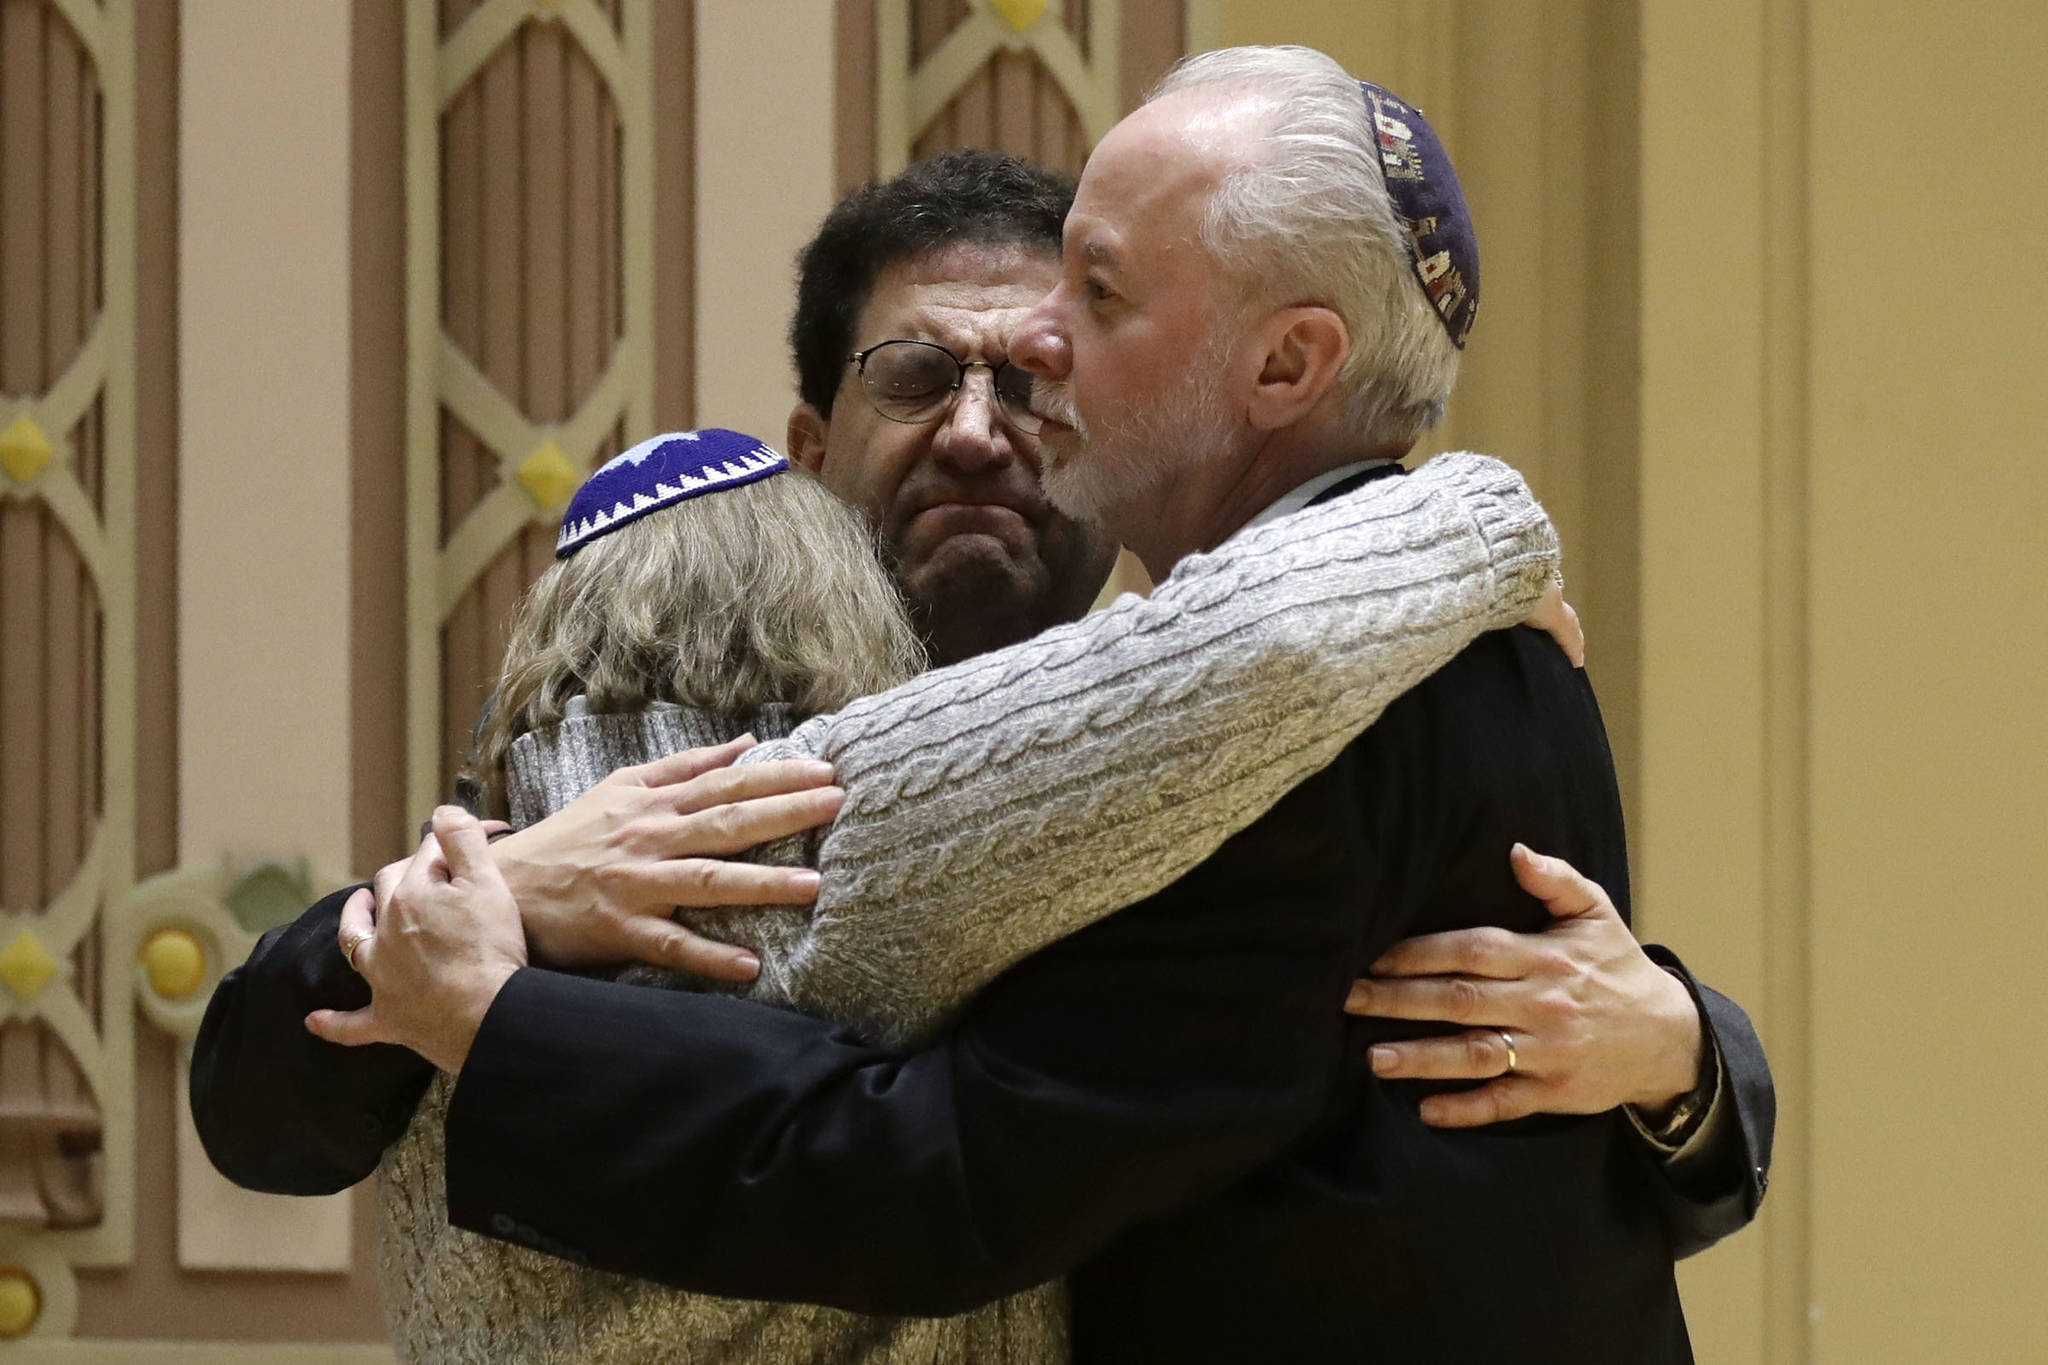 In this Oct. 28, 2018 photo, Rabbi Jeffrey Myers, right, of Tree of Life/Or L’Simcha Congregation hugs Rabbi Cheryl Klein, left, of Dor Hadash Congregation and Rabbi Jonathan Perlman during a community gathering held in the aftermath of a deadly shooting at the Tree of Life Synagogue in Pittsburgh. As the Jewish community grieved, Myers took a leading role during public memorials and presided over seven funerals in the space of less than a week. (Matt Rourke | Associated Press File)